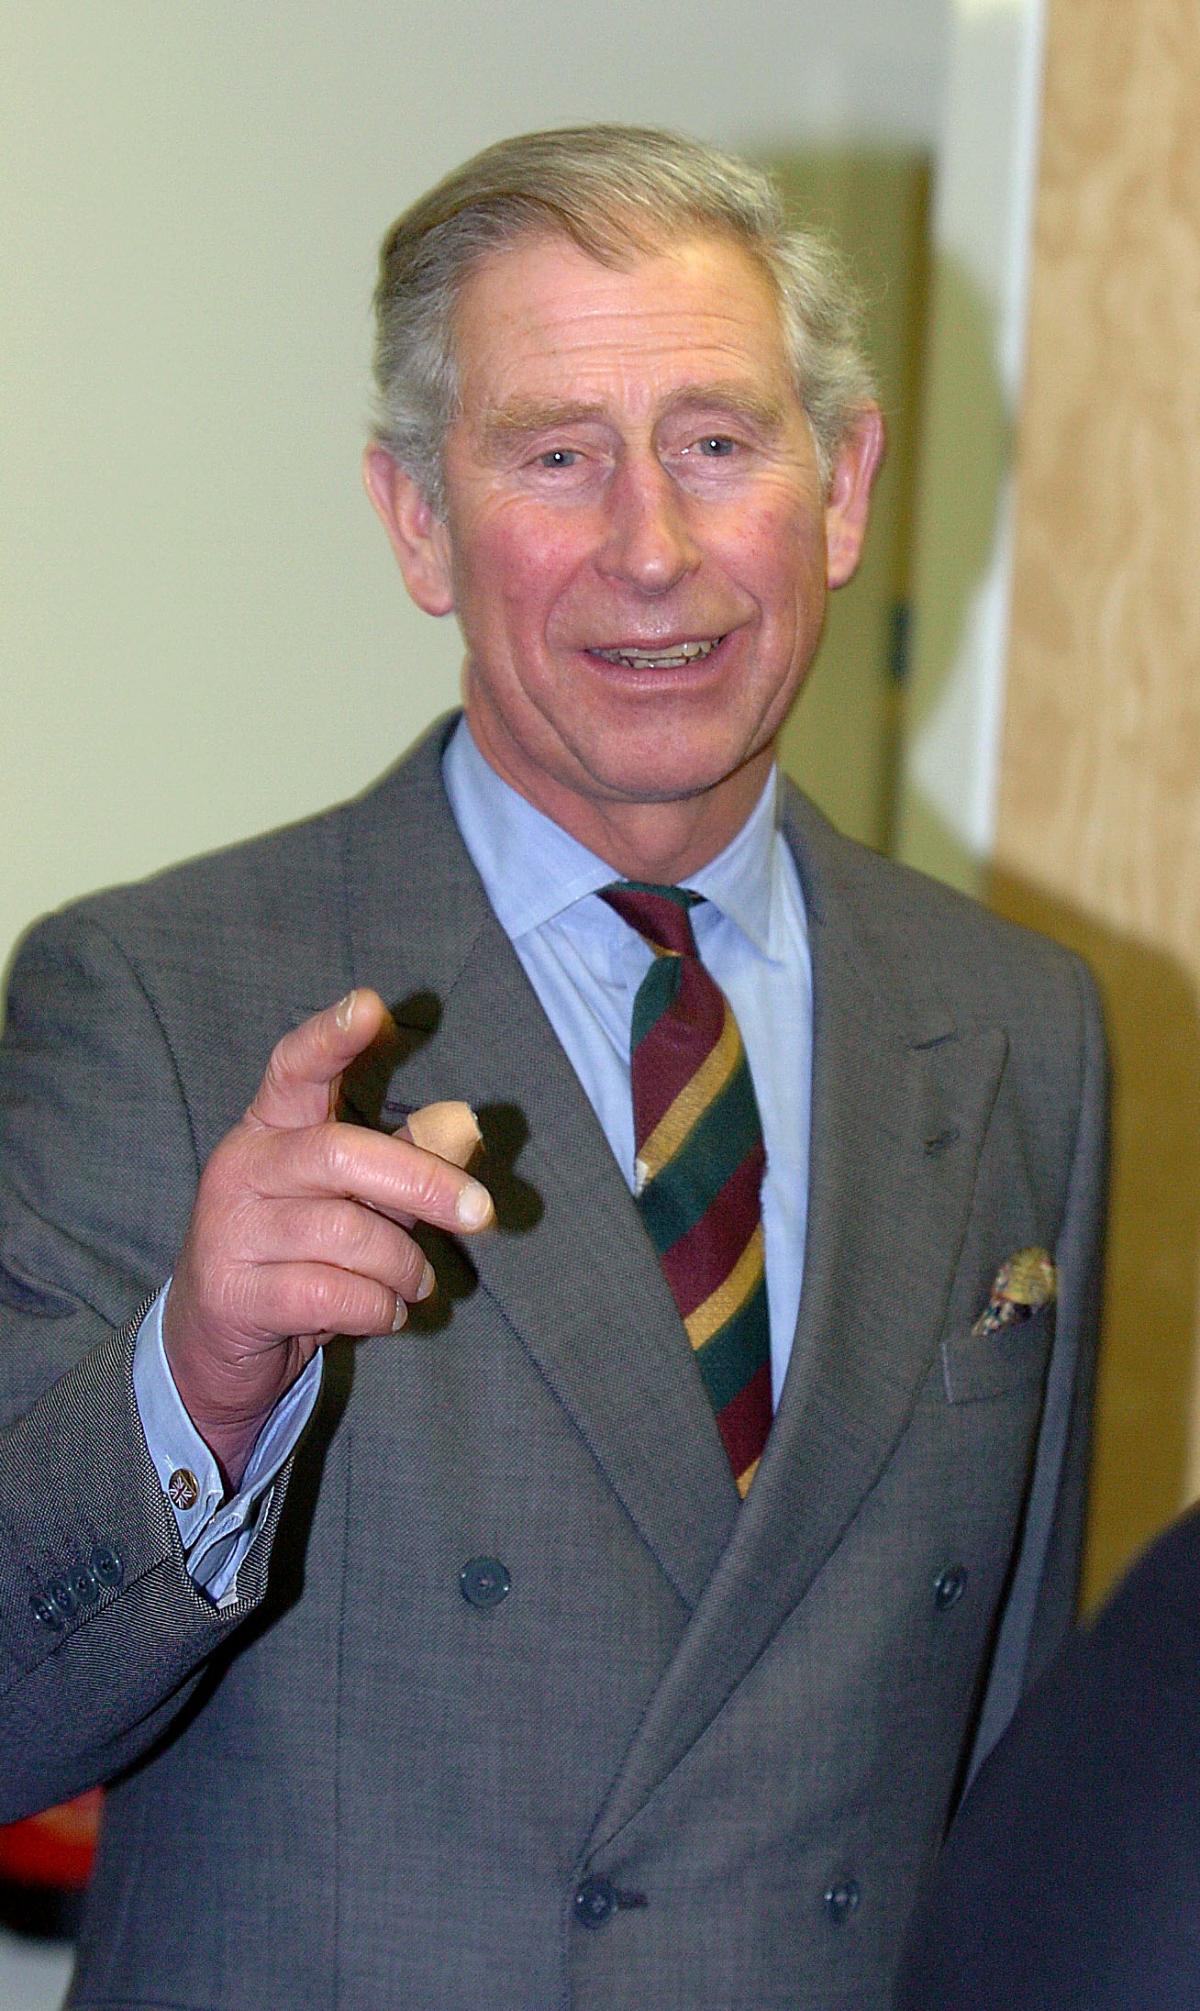 Prince Charles at the Cornerstone Centre, Cottingley